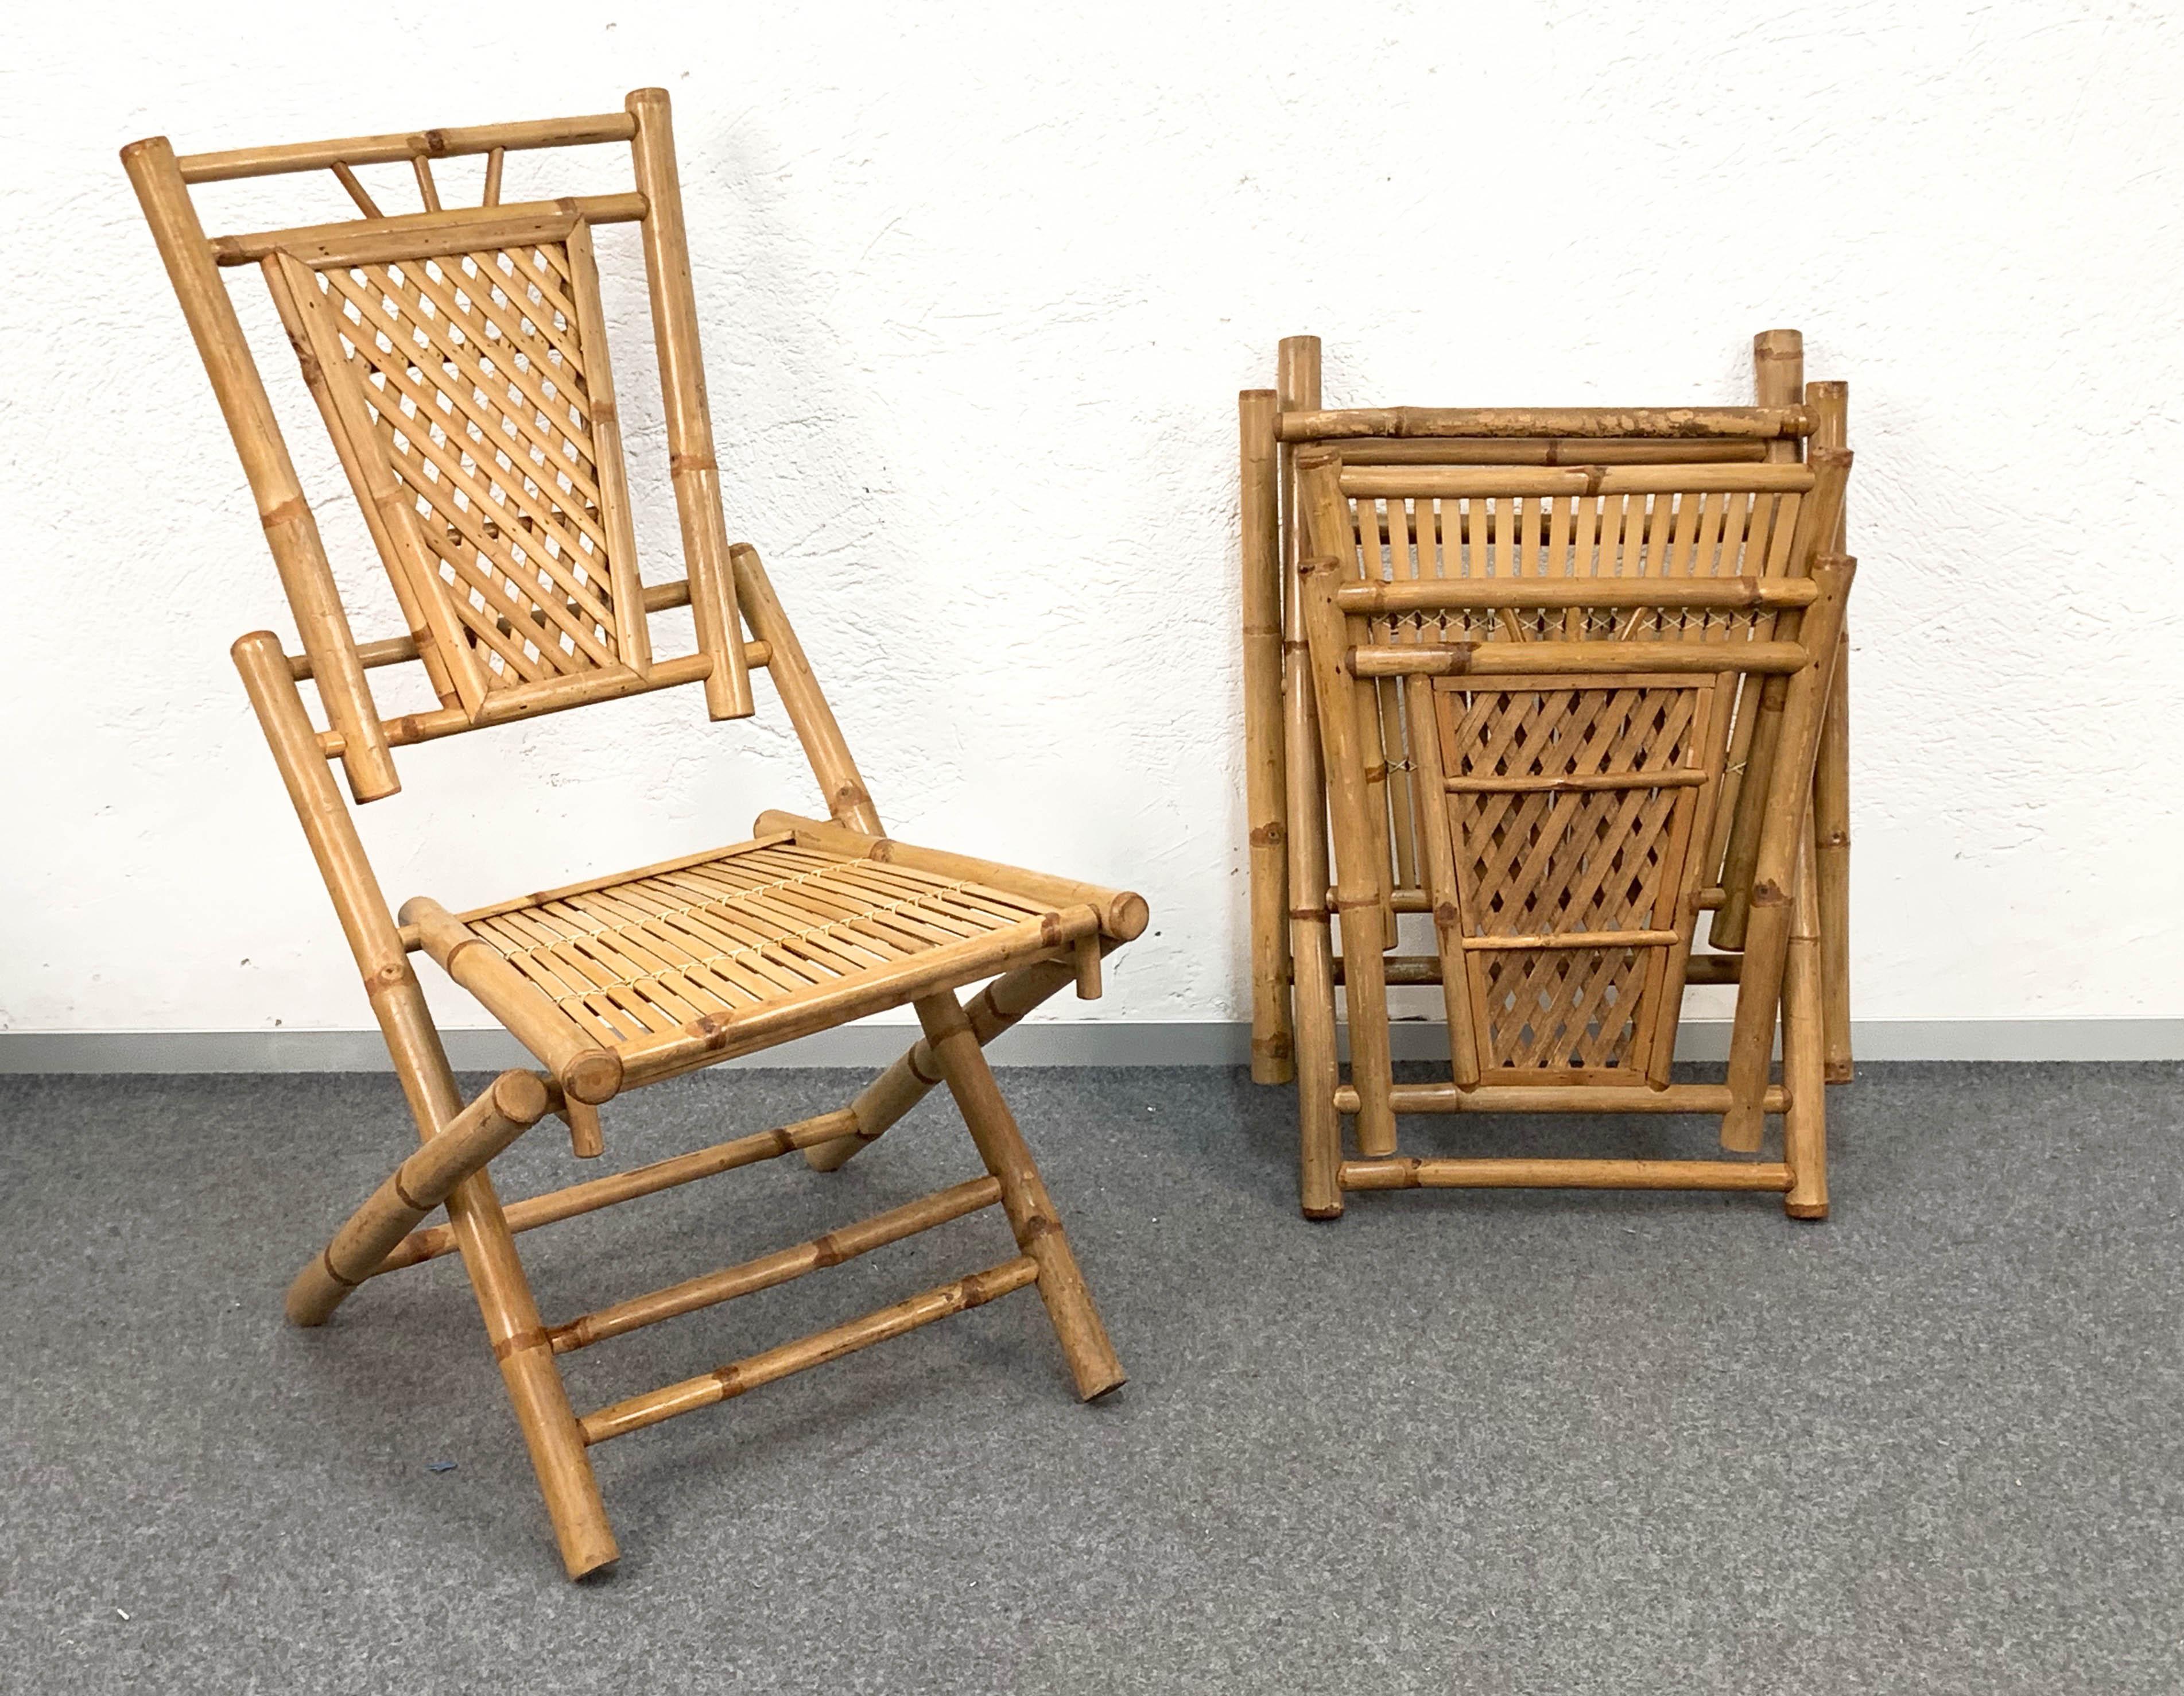 Midcentury Bamboo and Rattan Italian Foldable Table and Four Chairs, 1960s For Sale 10